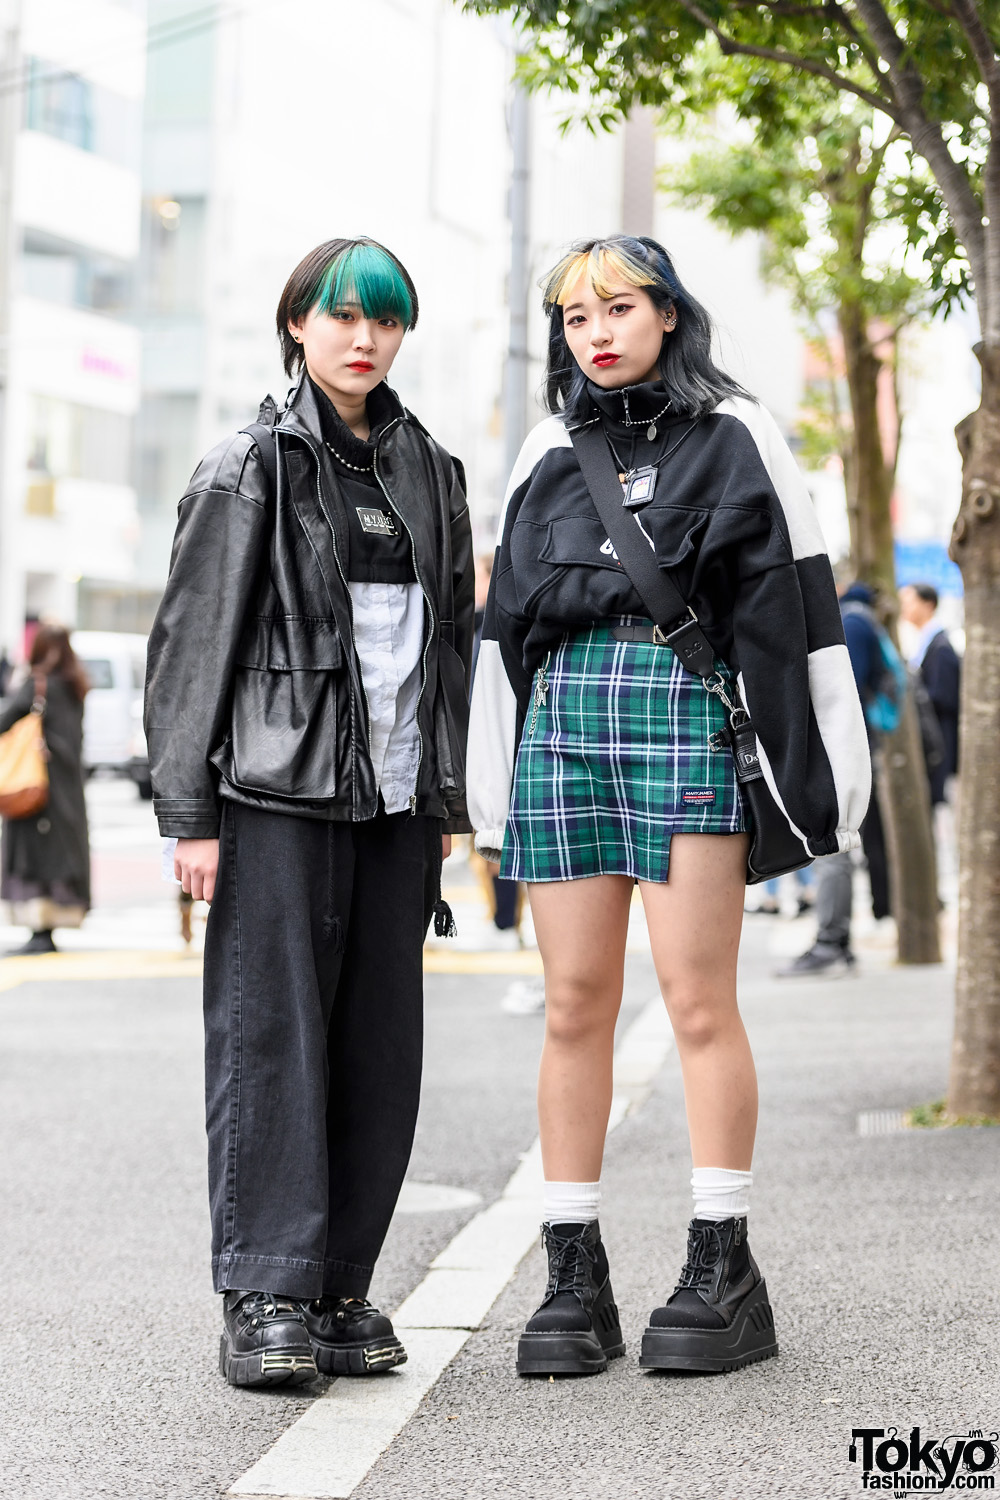 Harajuku Girls Streetwear Styles w/ Green Bangs, M.Y.O.B., Never Mind the XU, Mary James Plaid Skirt, Prada Backpack, Another Youth, D&G, New Rock & Demonia Boots